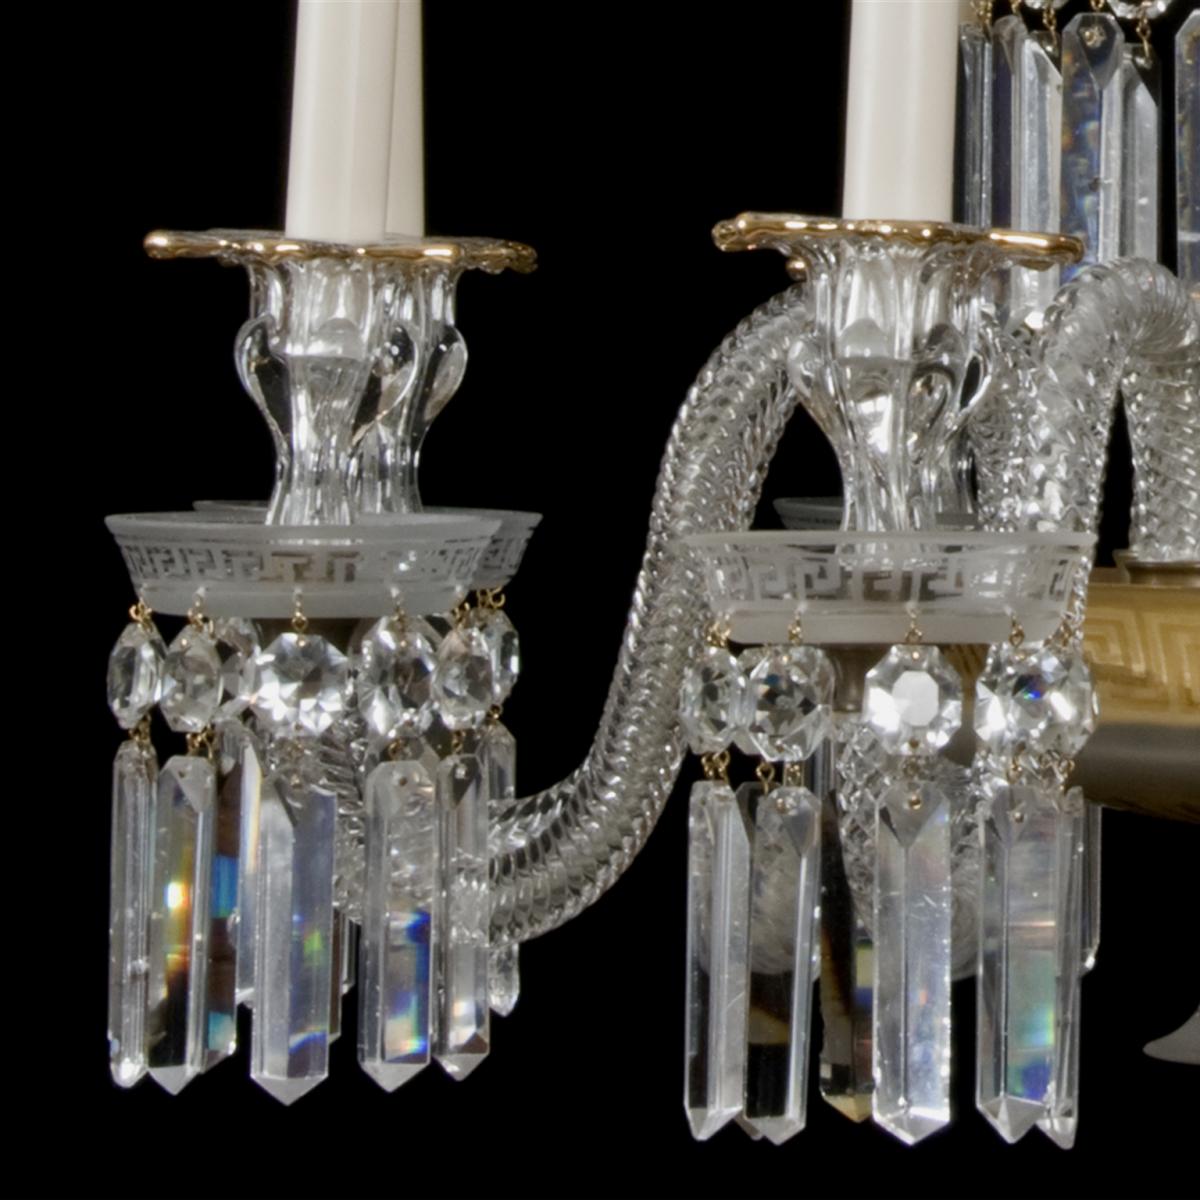 Detail of a Neoclassical Chandelier by Baccarat